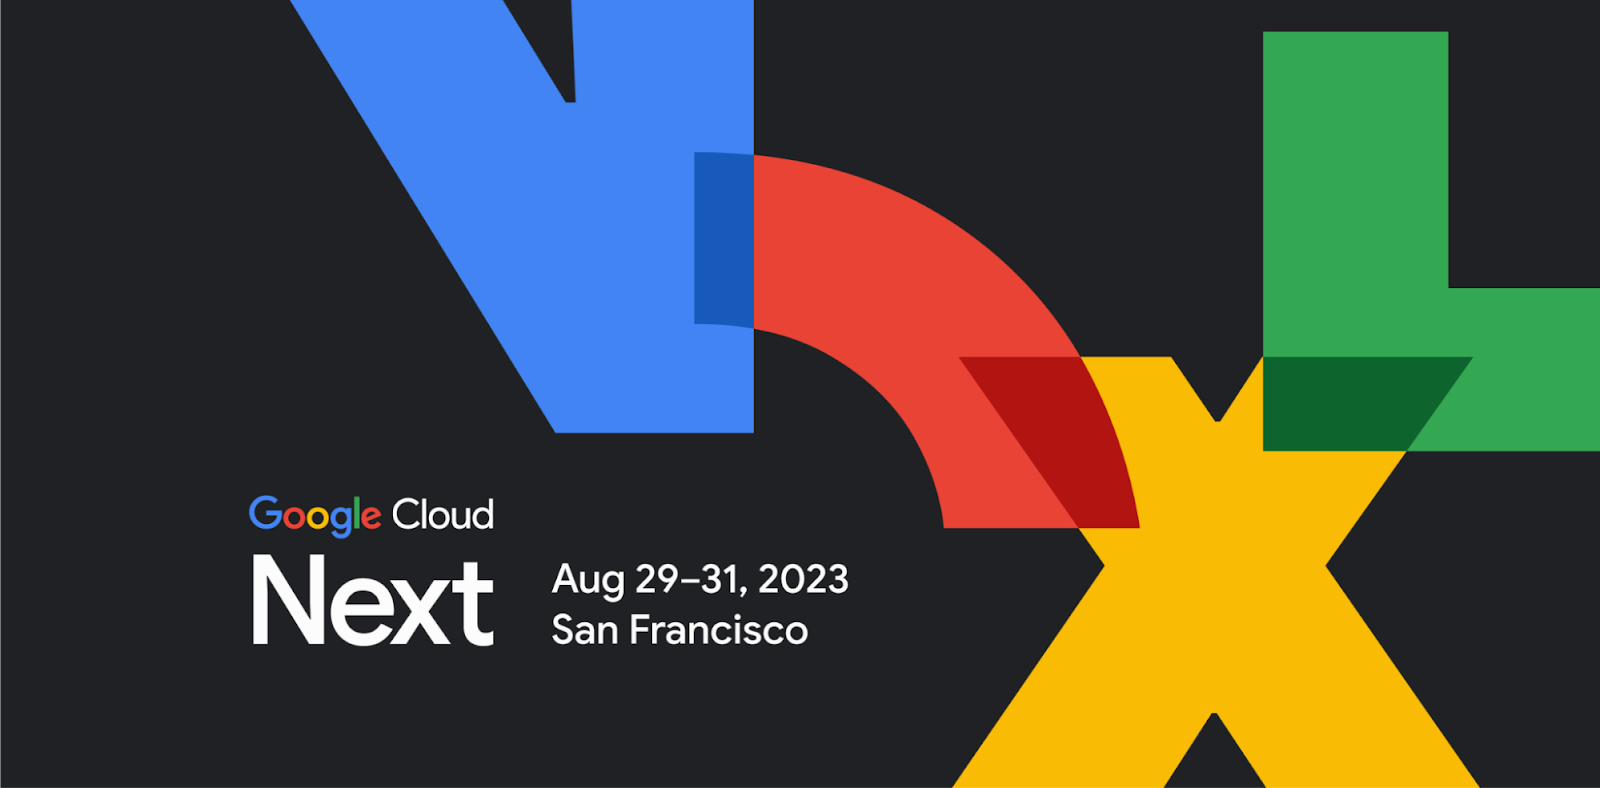 Google Cloud Next is coming to San Francisco, August 29-31, 2023